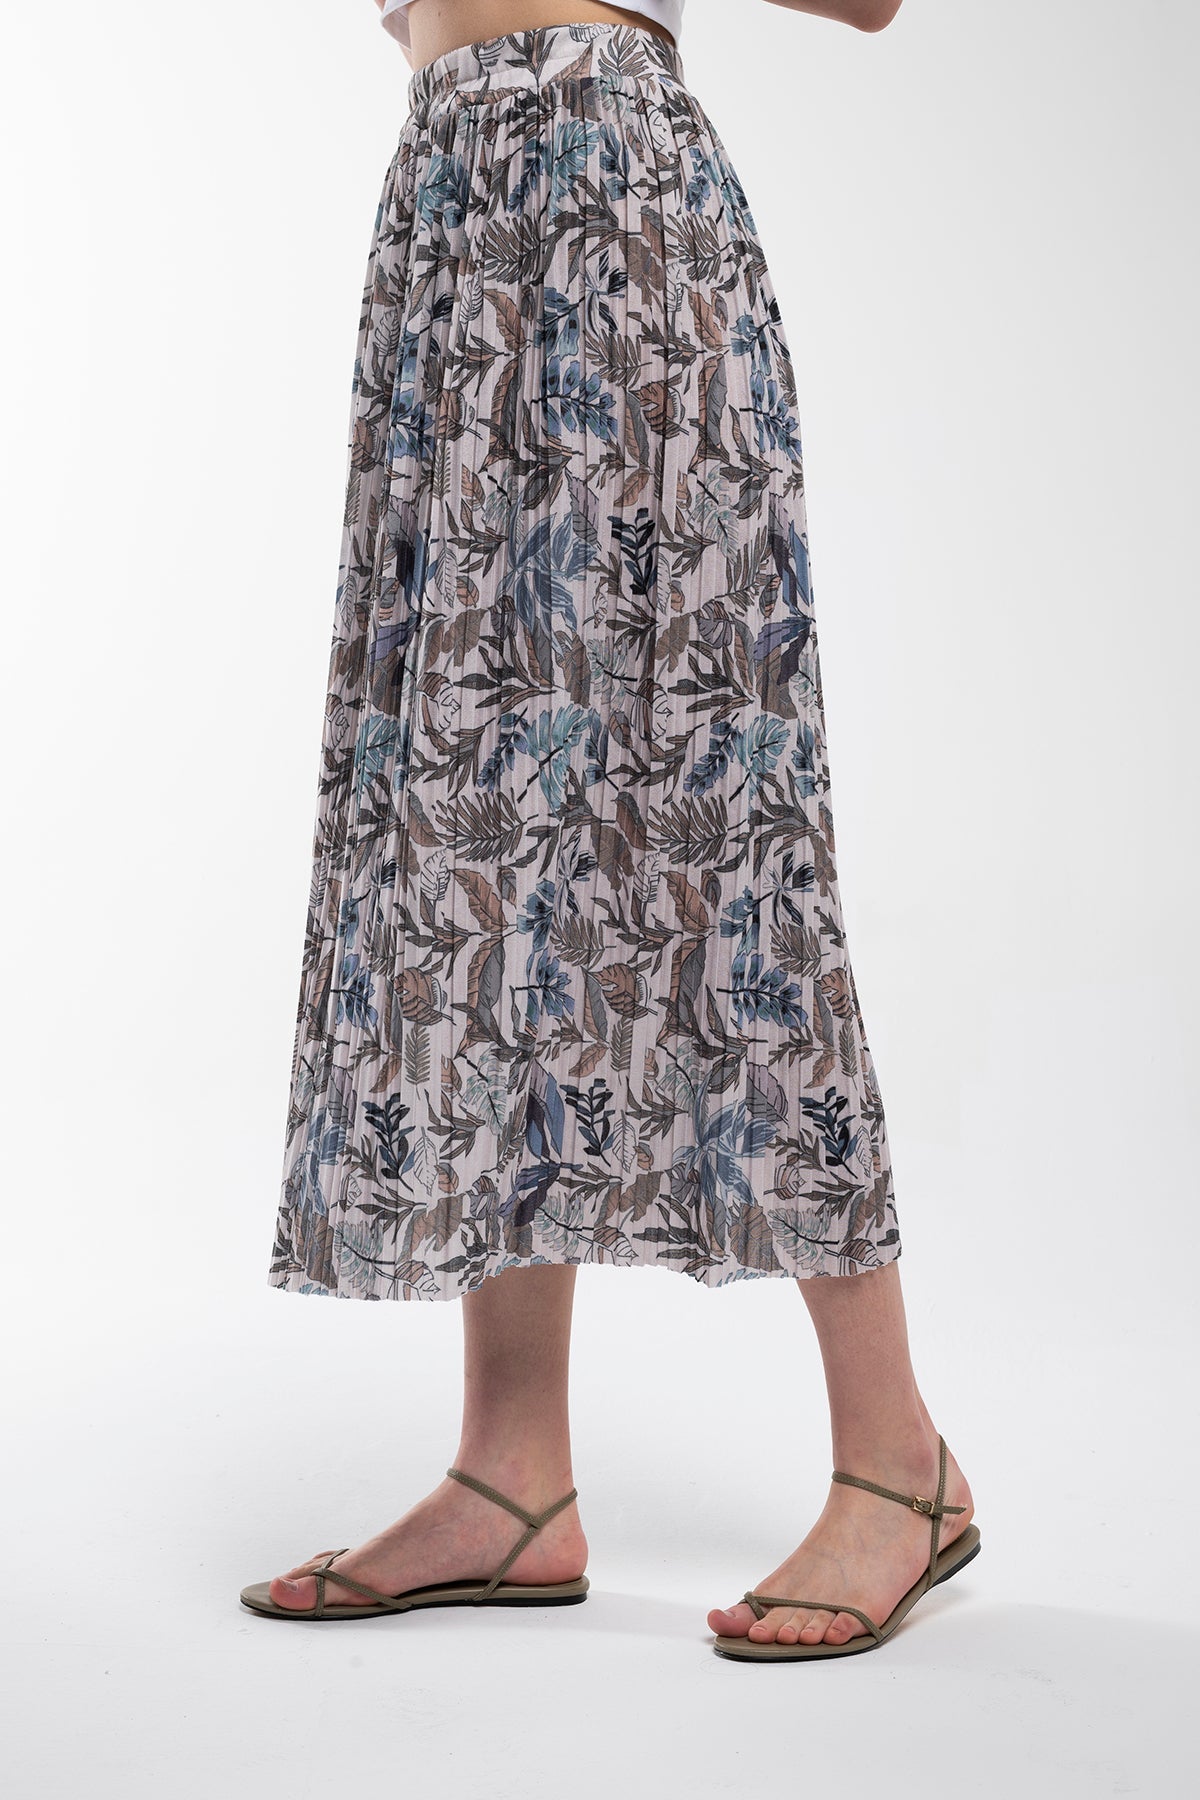 Floral print maxi skirt for spring